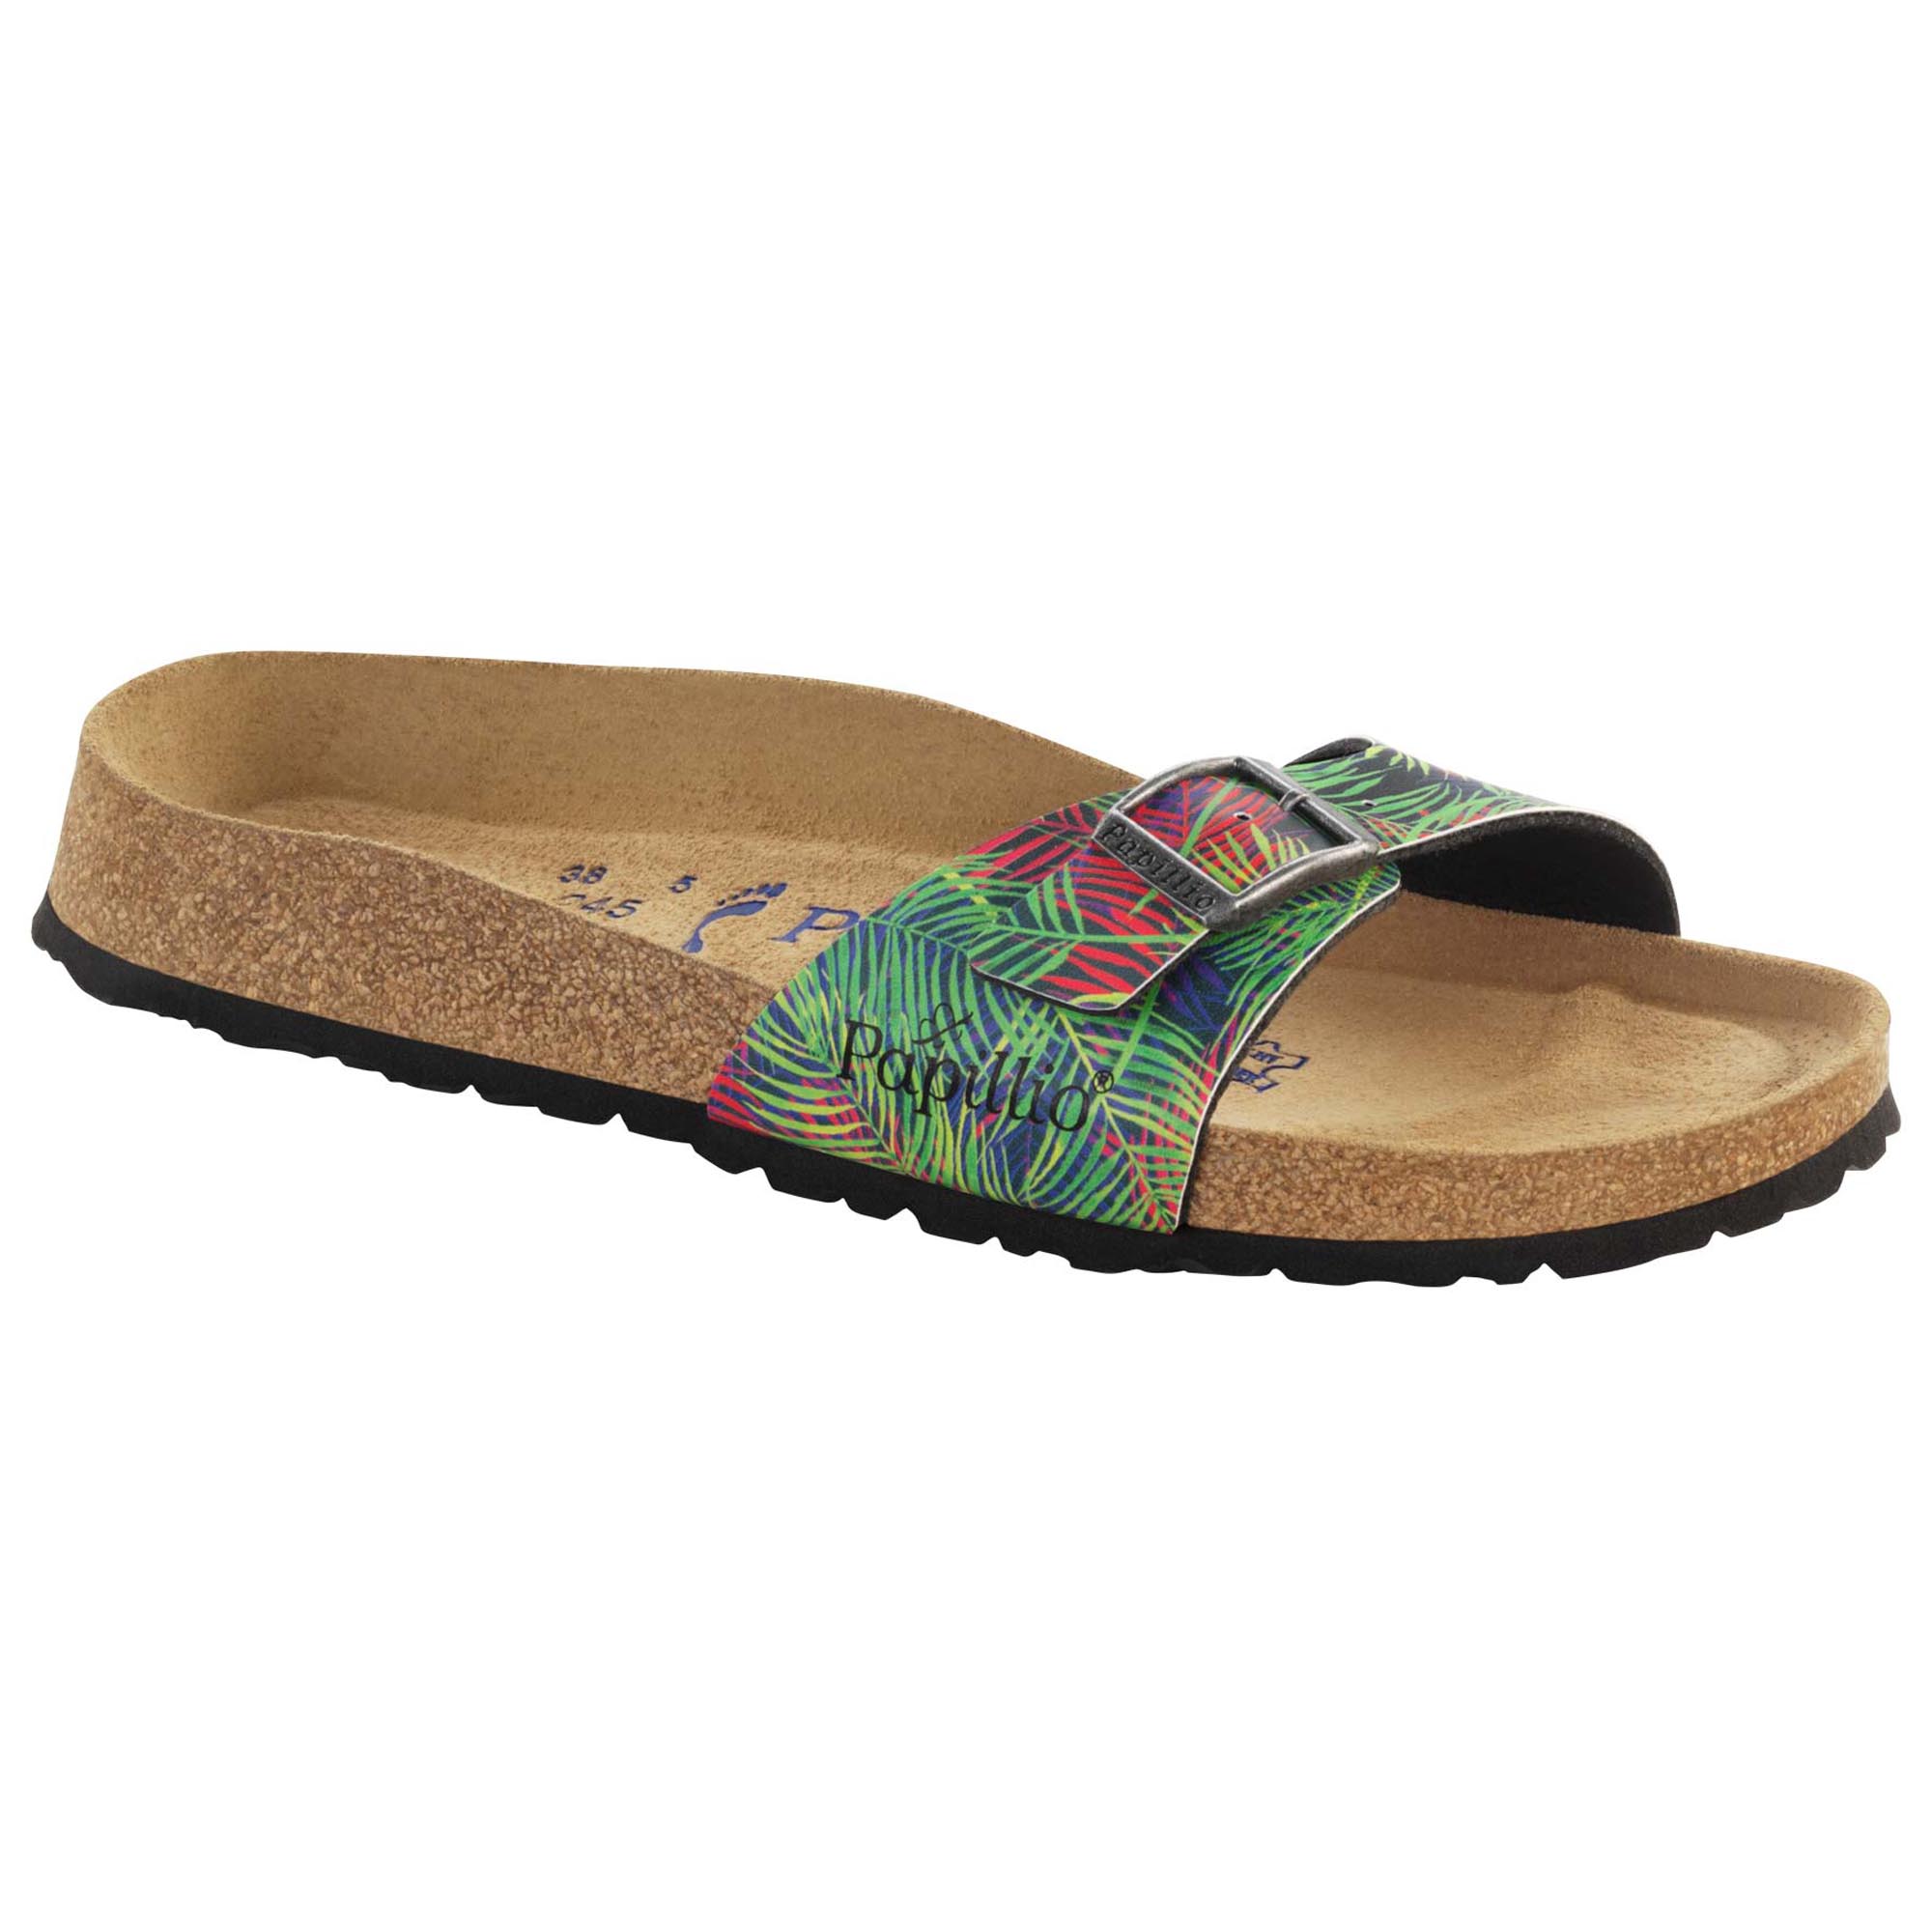 basketbal Meting Intimidatie Birkenstock Papillio Outlet, Buy Now, Outlet, 55% OFF, playgrowned.com